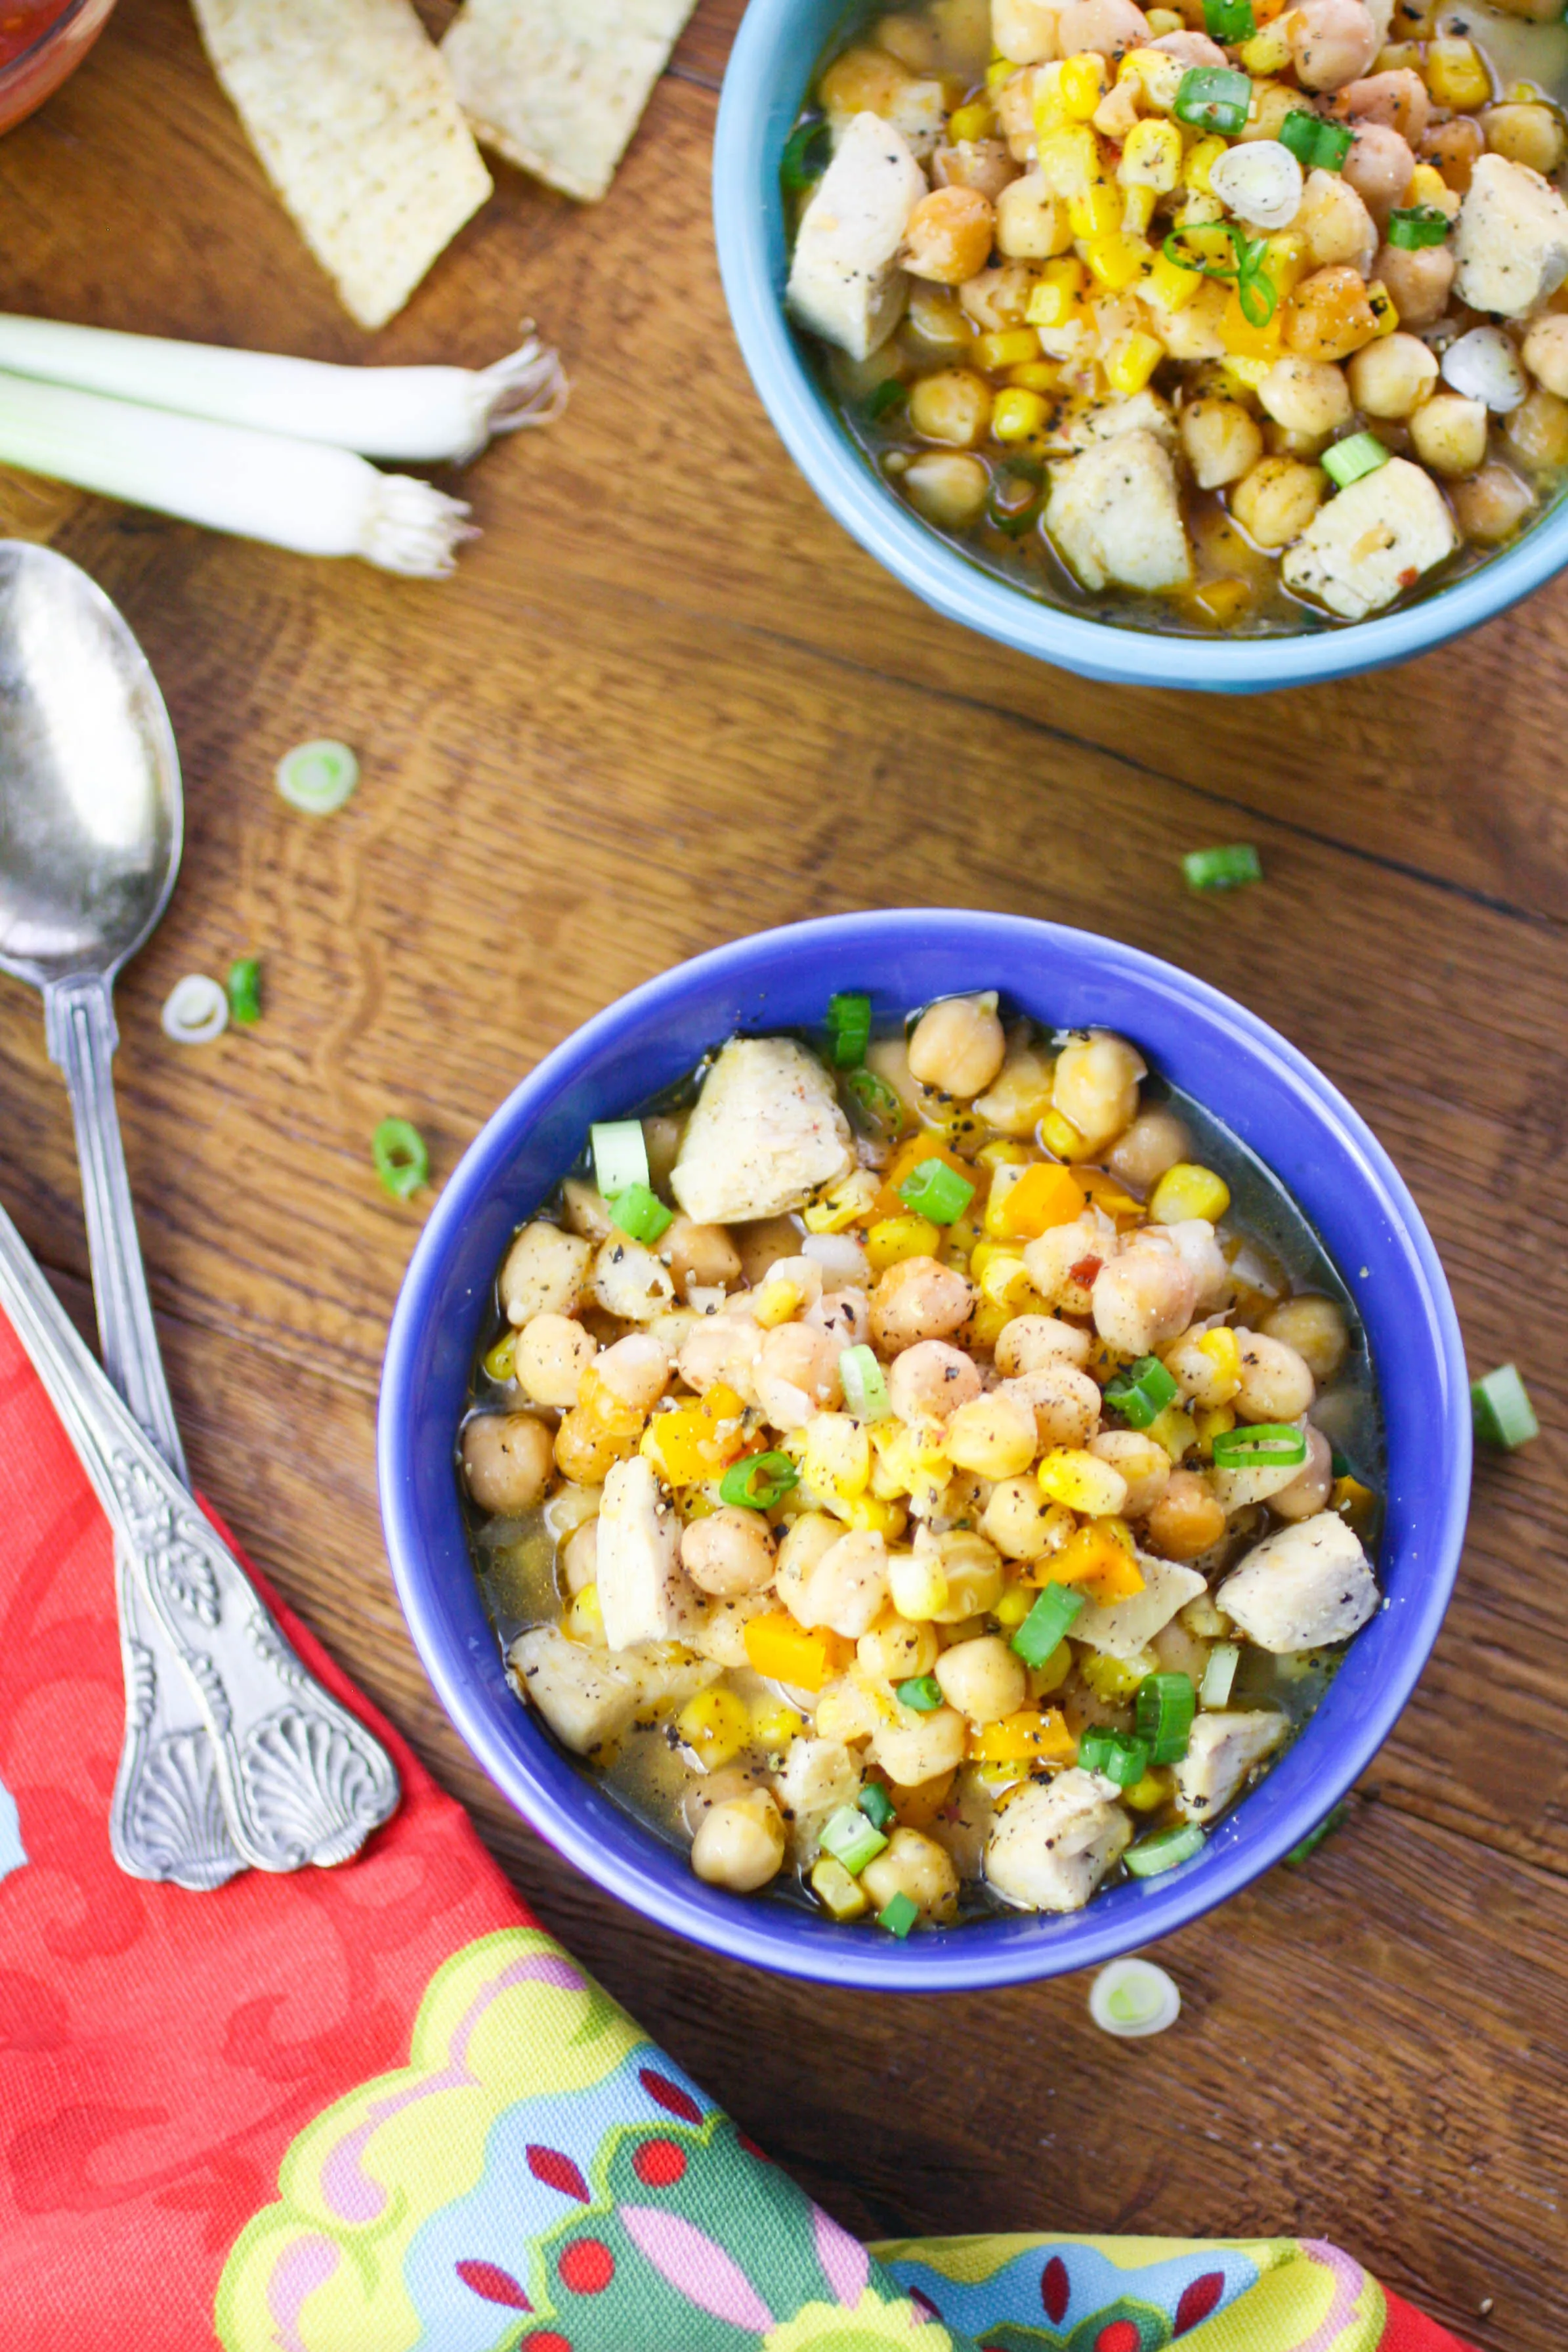 Easy Chicken and Chickpea Chili is a lovely dish any night of the week. This chili is perfect when it's cold outdoors!